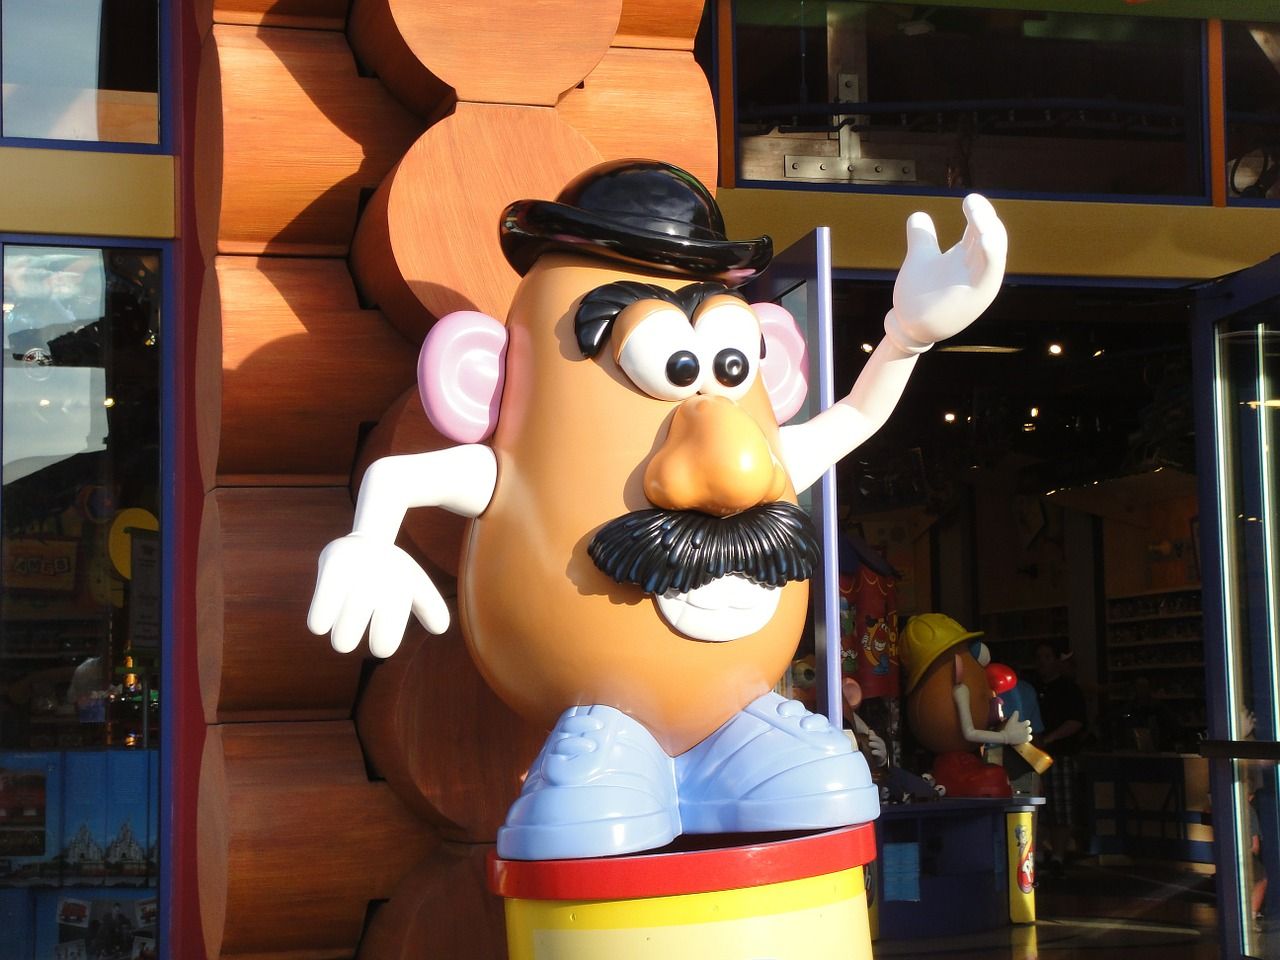 Know all about Mr and Mrs Potato Head from ‘Toy Story’ fame